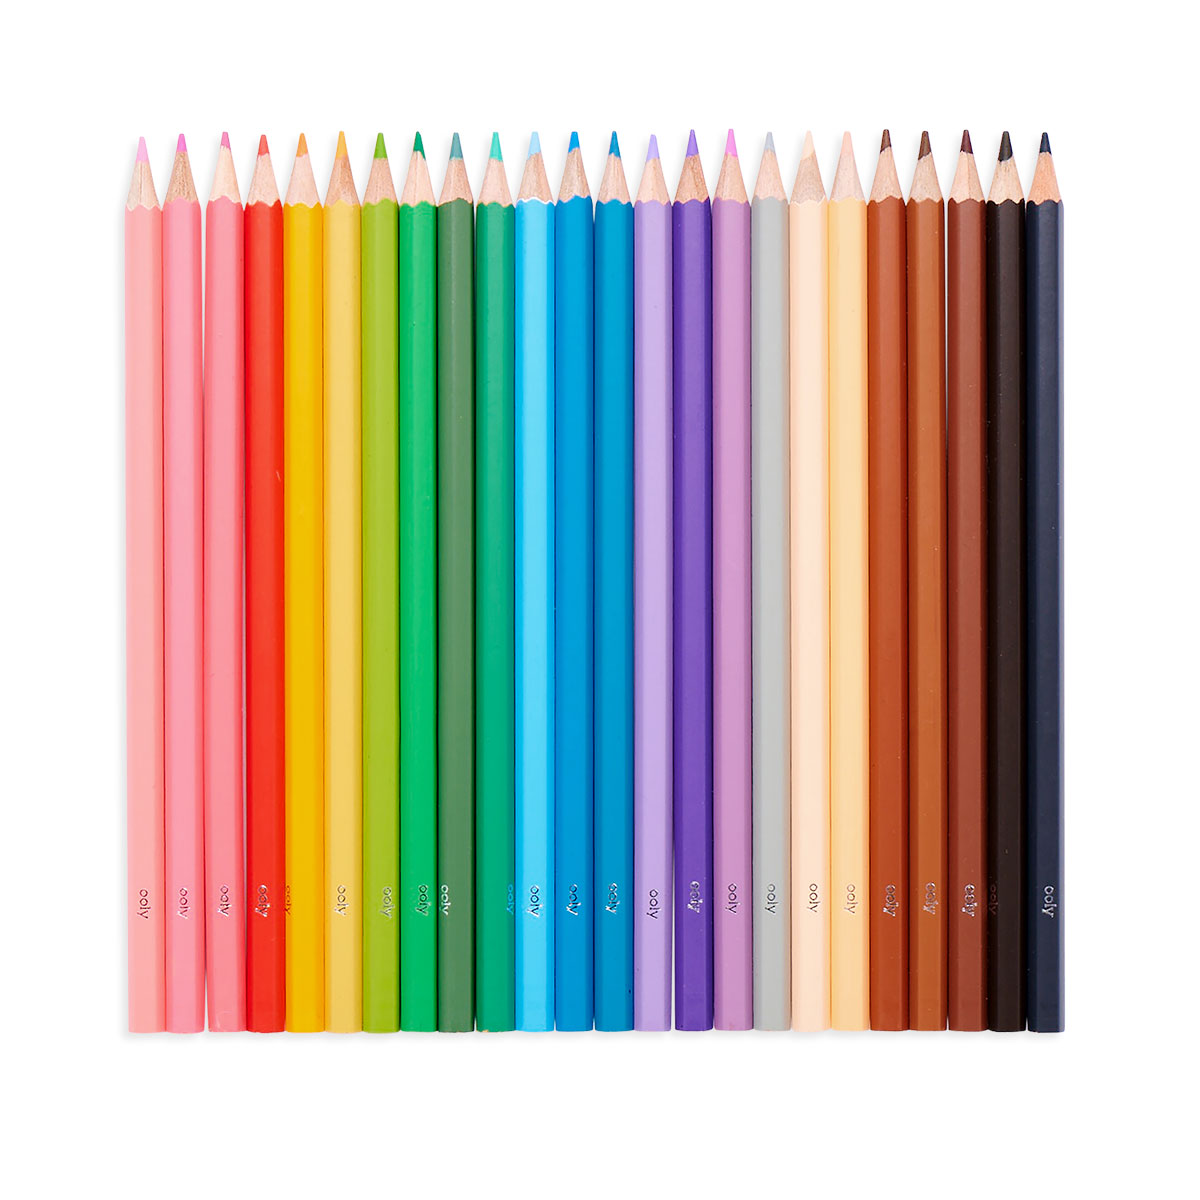 Color Together Colored Pencils - Set of 24 (18 Classic & 6 Skin Tone Colors)